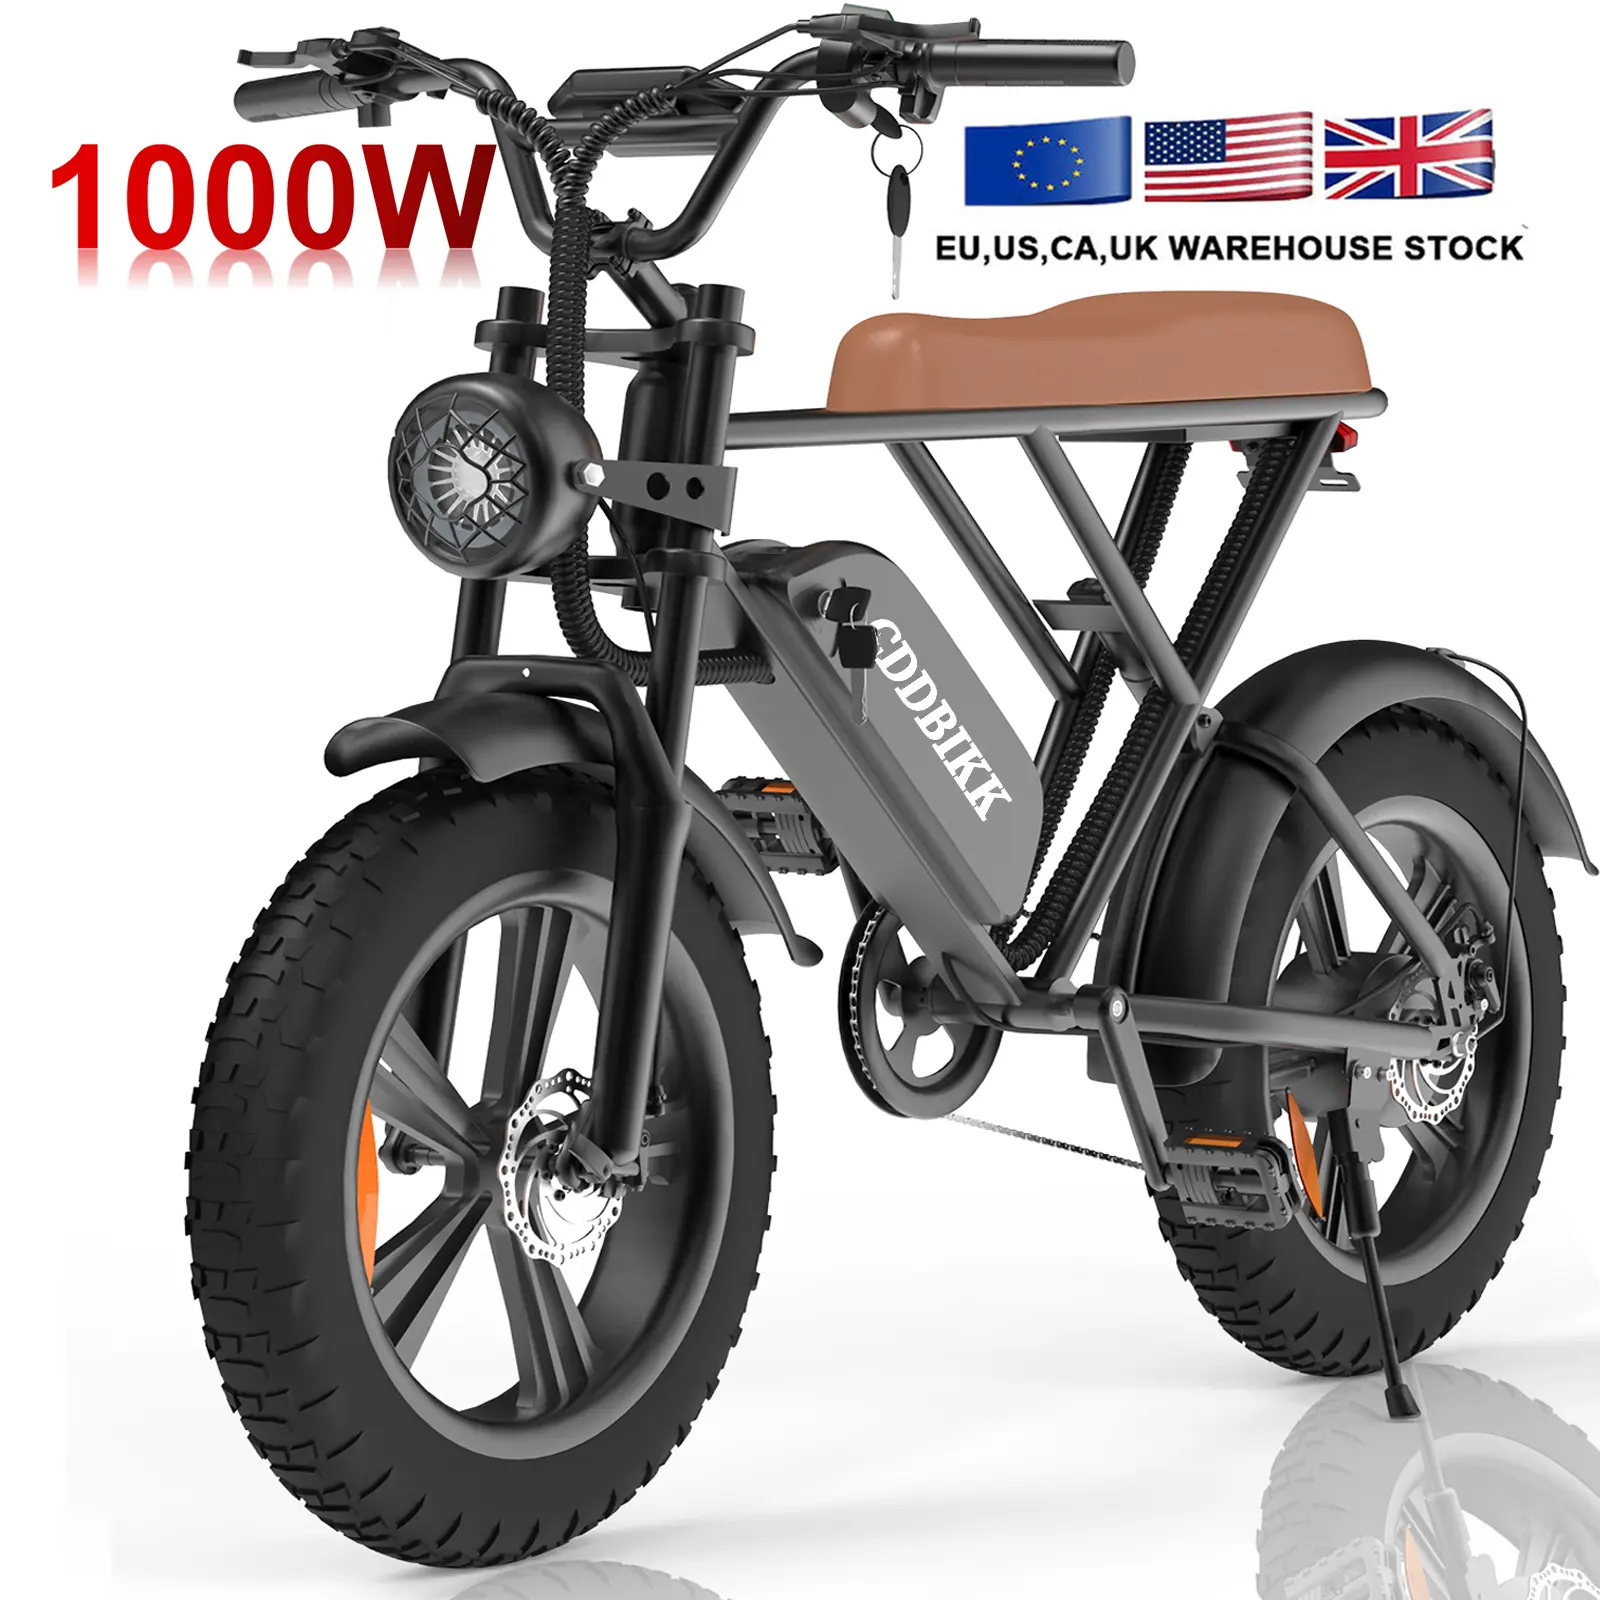 Factory Price 7 Speed City Bike For Adults Eu Warehouse bicycle With Motor Bikes 1000watts Alloy 48v Electric Mountain Bike